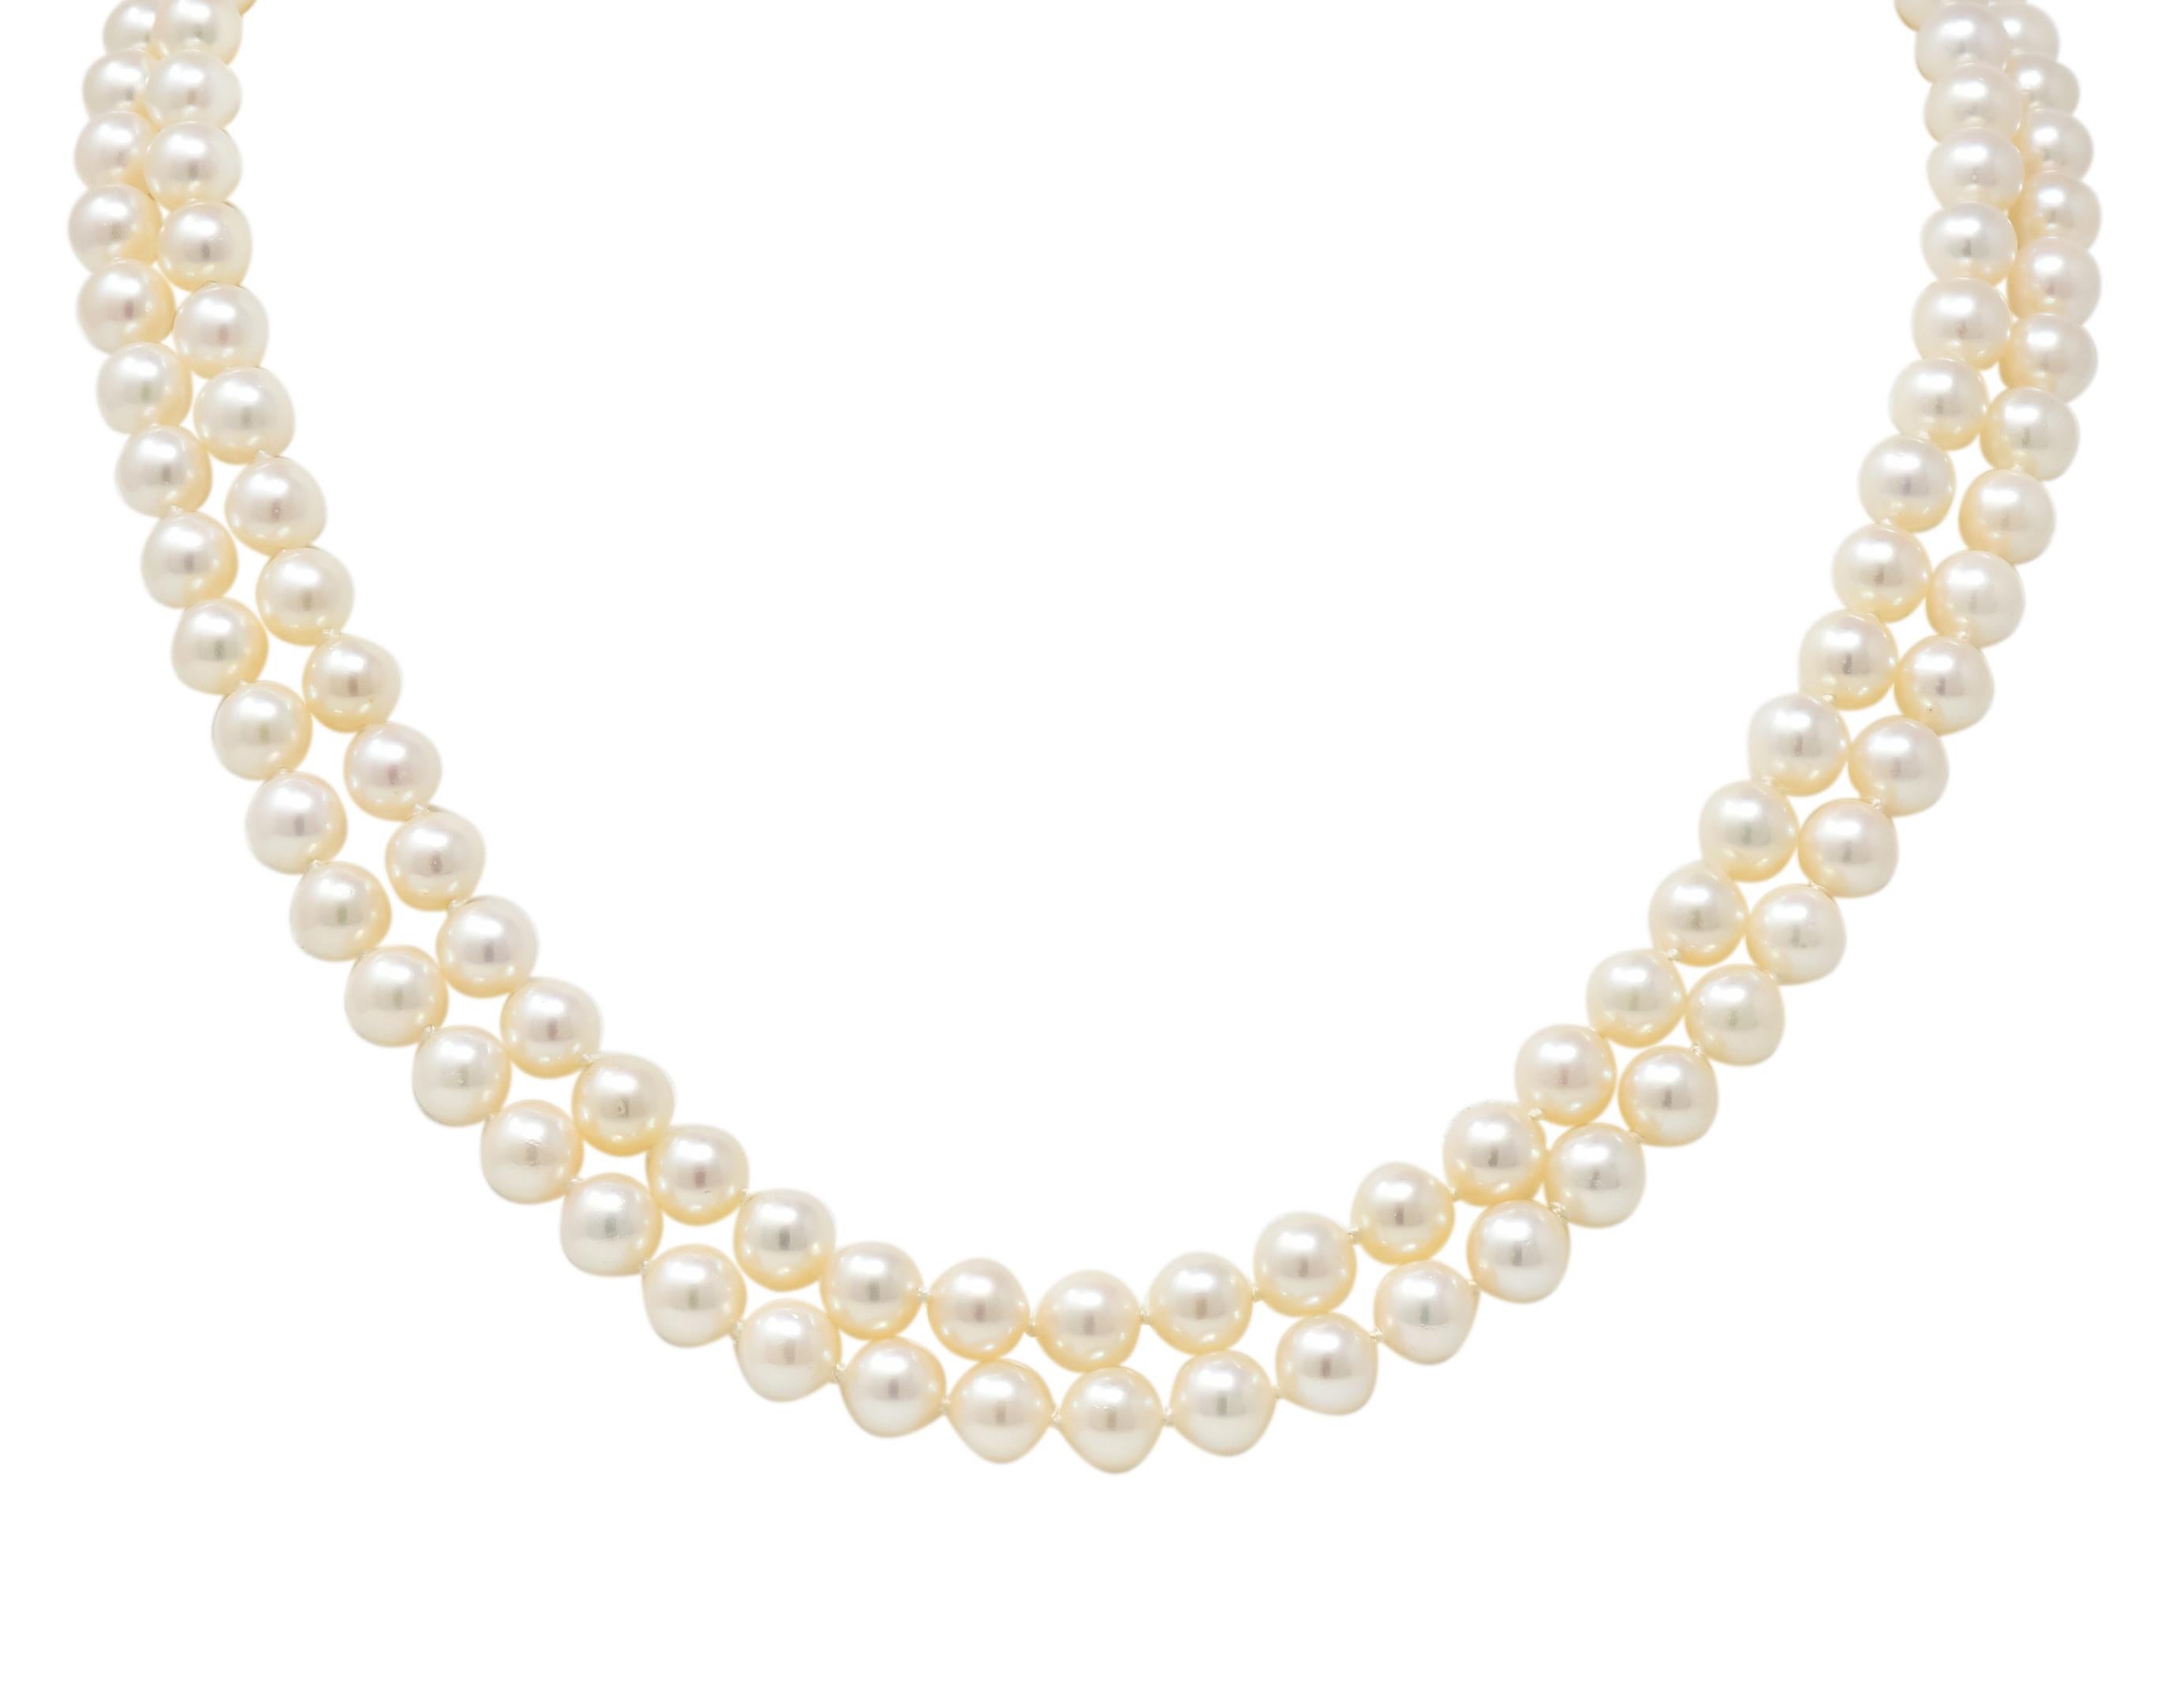 Designed as two knotted strands of round cultured pearls measuring approximately 5.5 mm

Pearls are very well matched, cream in body color with rosé overtones and excellent luster

Completed by a stylized “X” slide clasp

Fully signed Tiffany & Co.